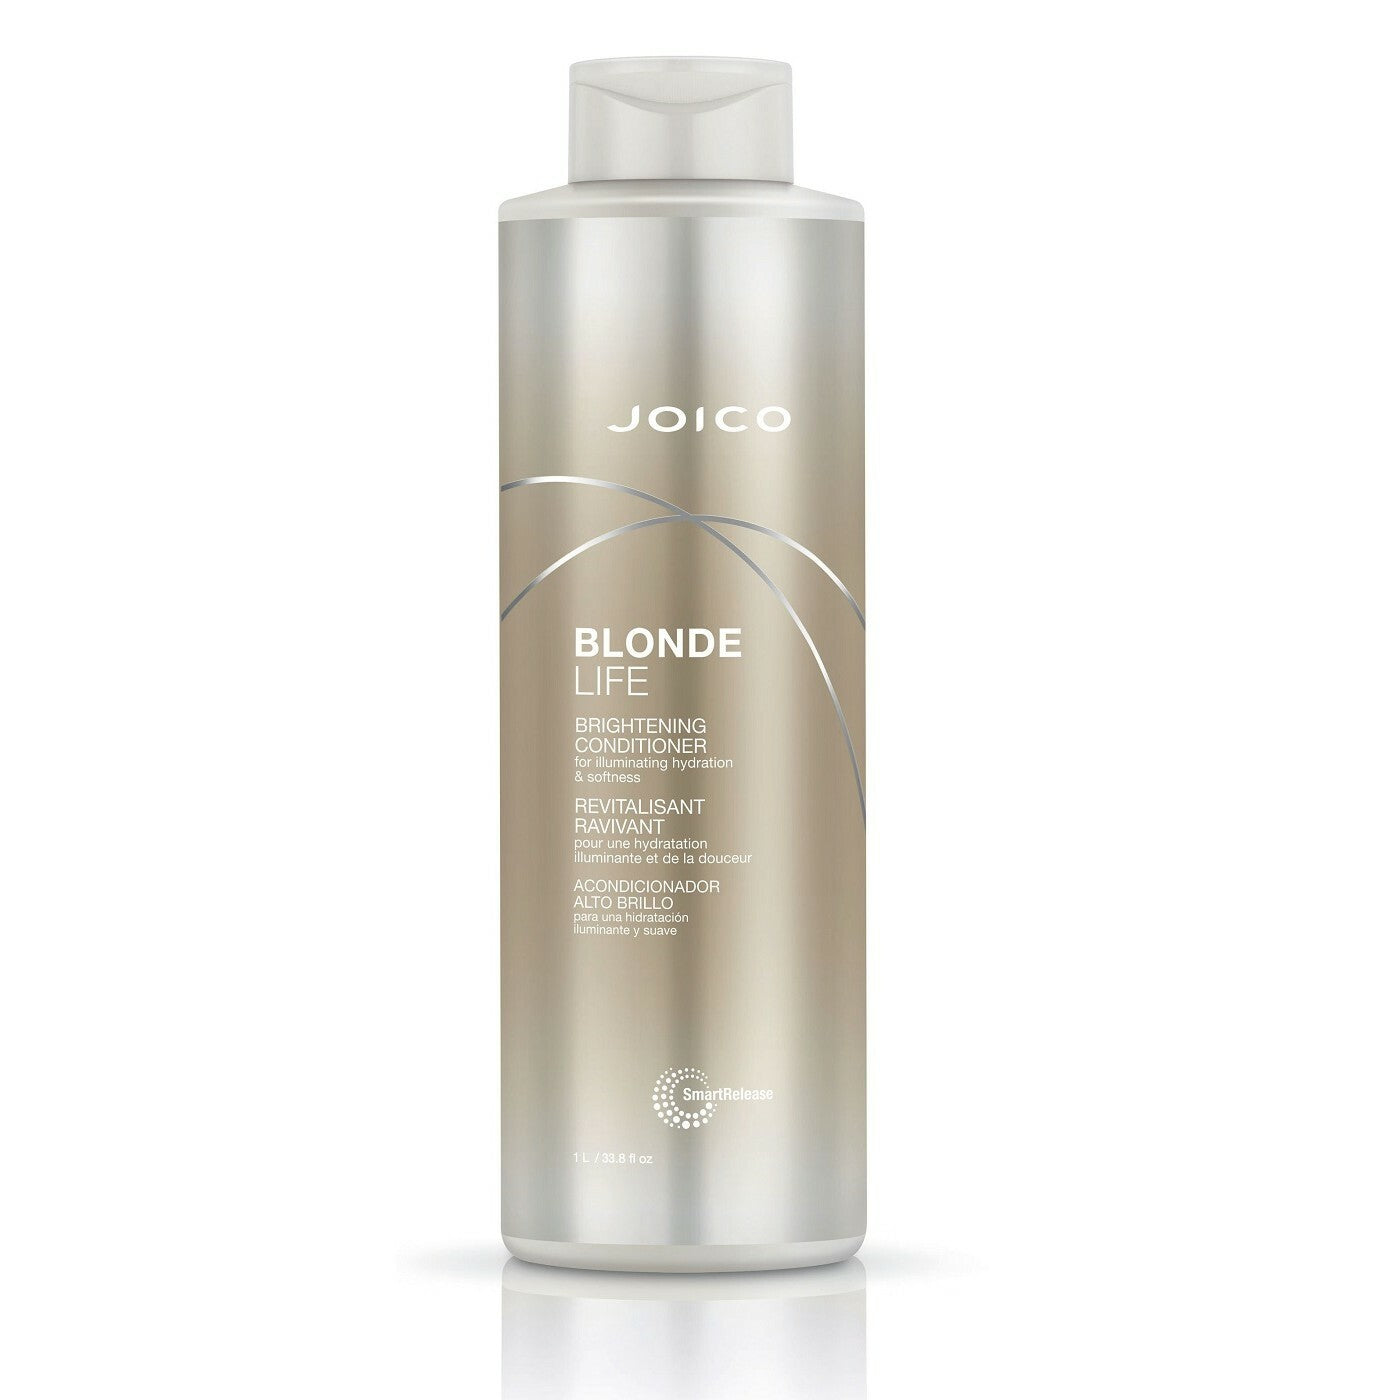 Joico - Blonde Life - Brightening Conditioner - 1L - ProCare Outlet by Joico